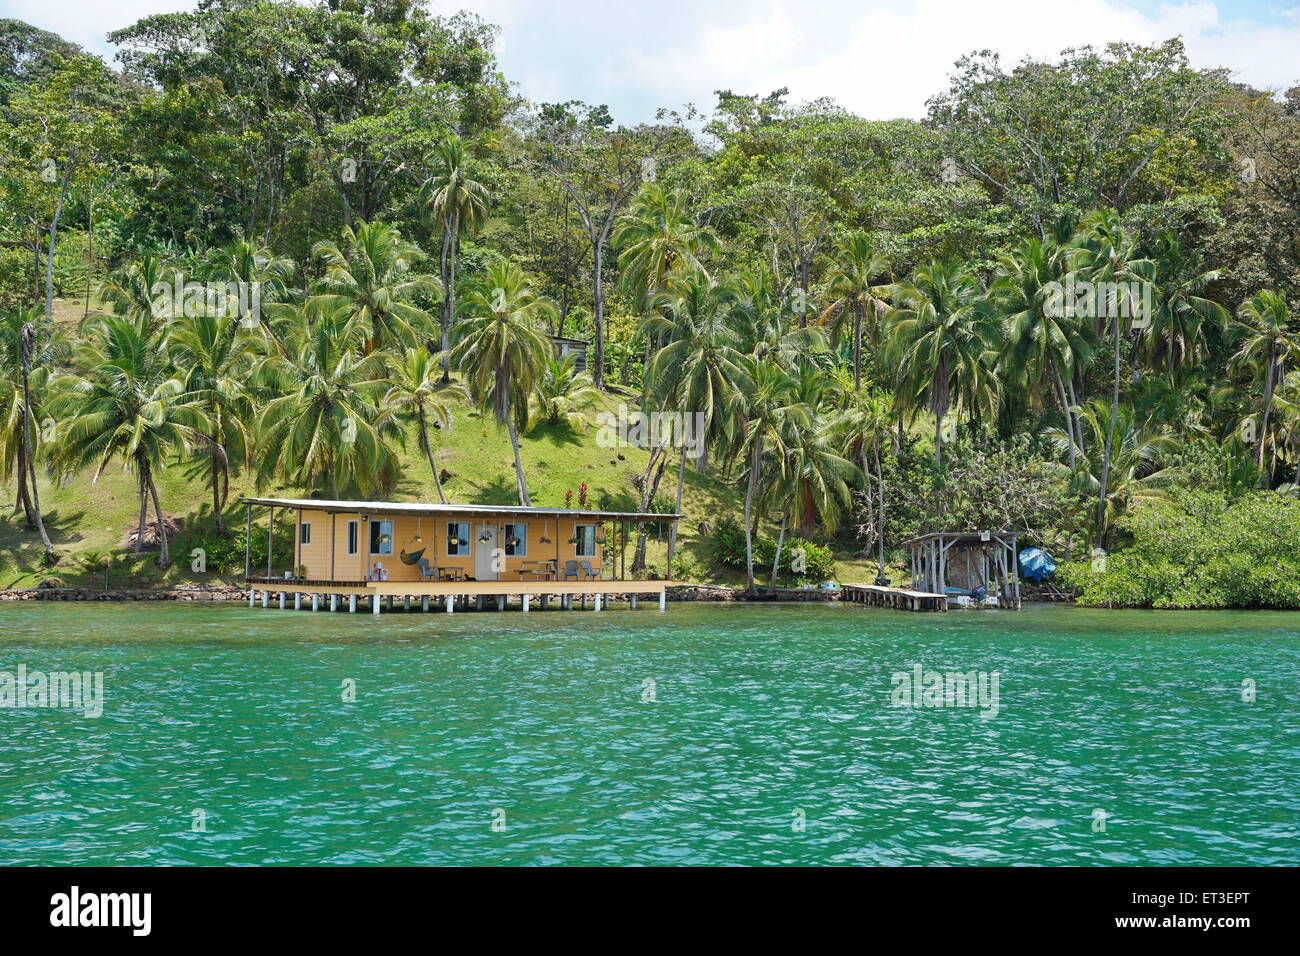 Lush coastal landscape with coconut palm trees and a house over water, Caribbean shore of Panama, Central America Stock Photo